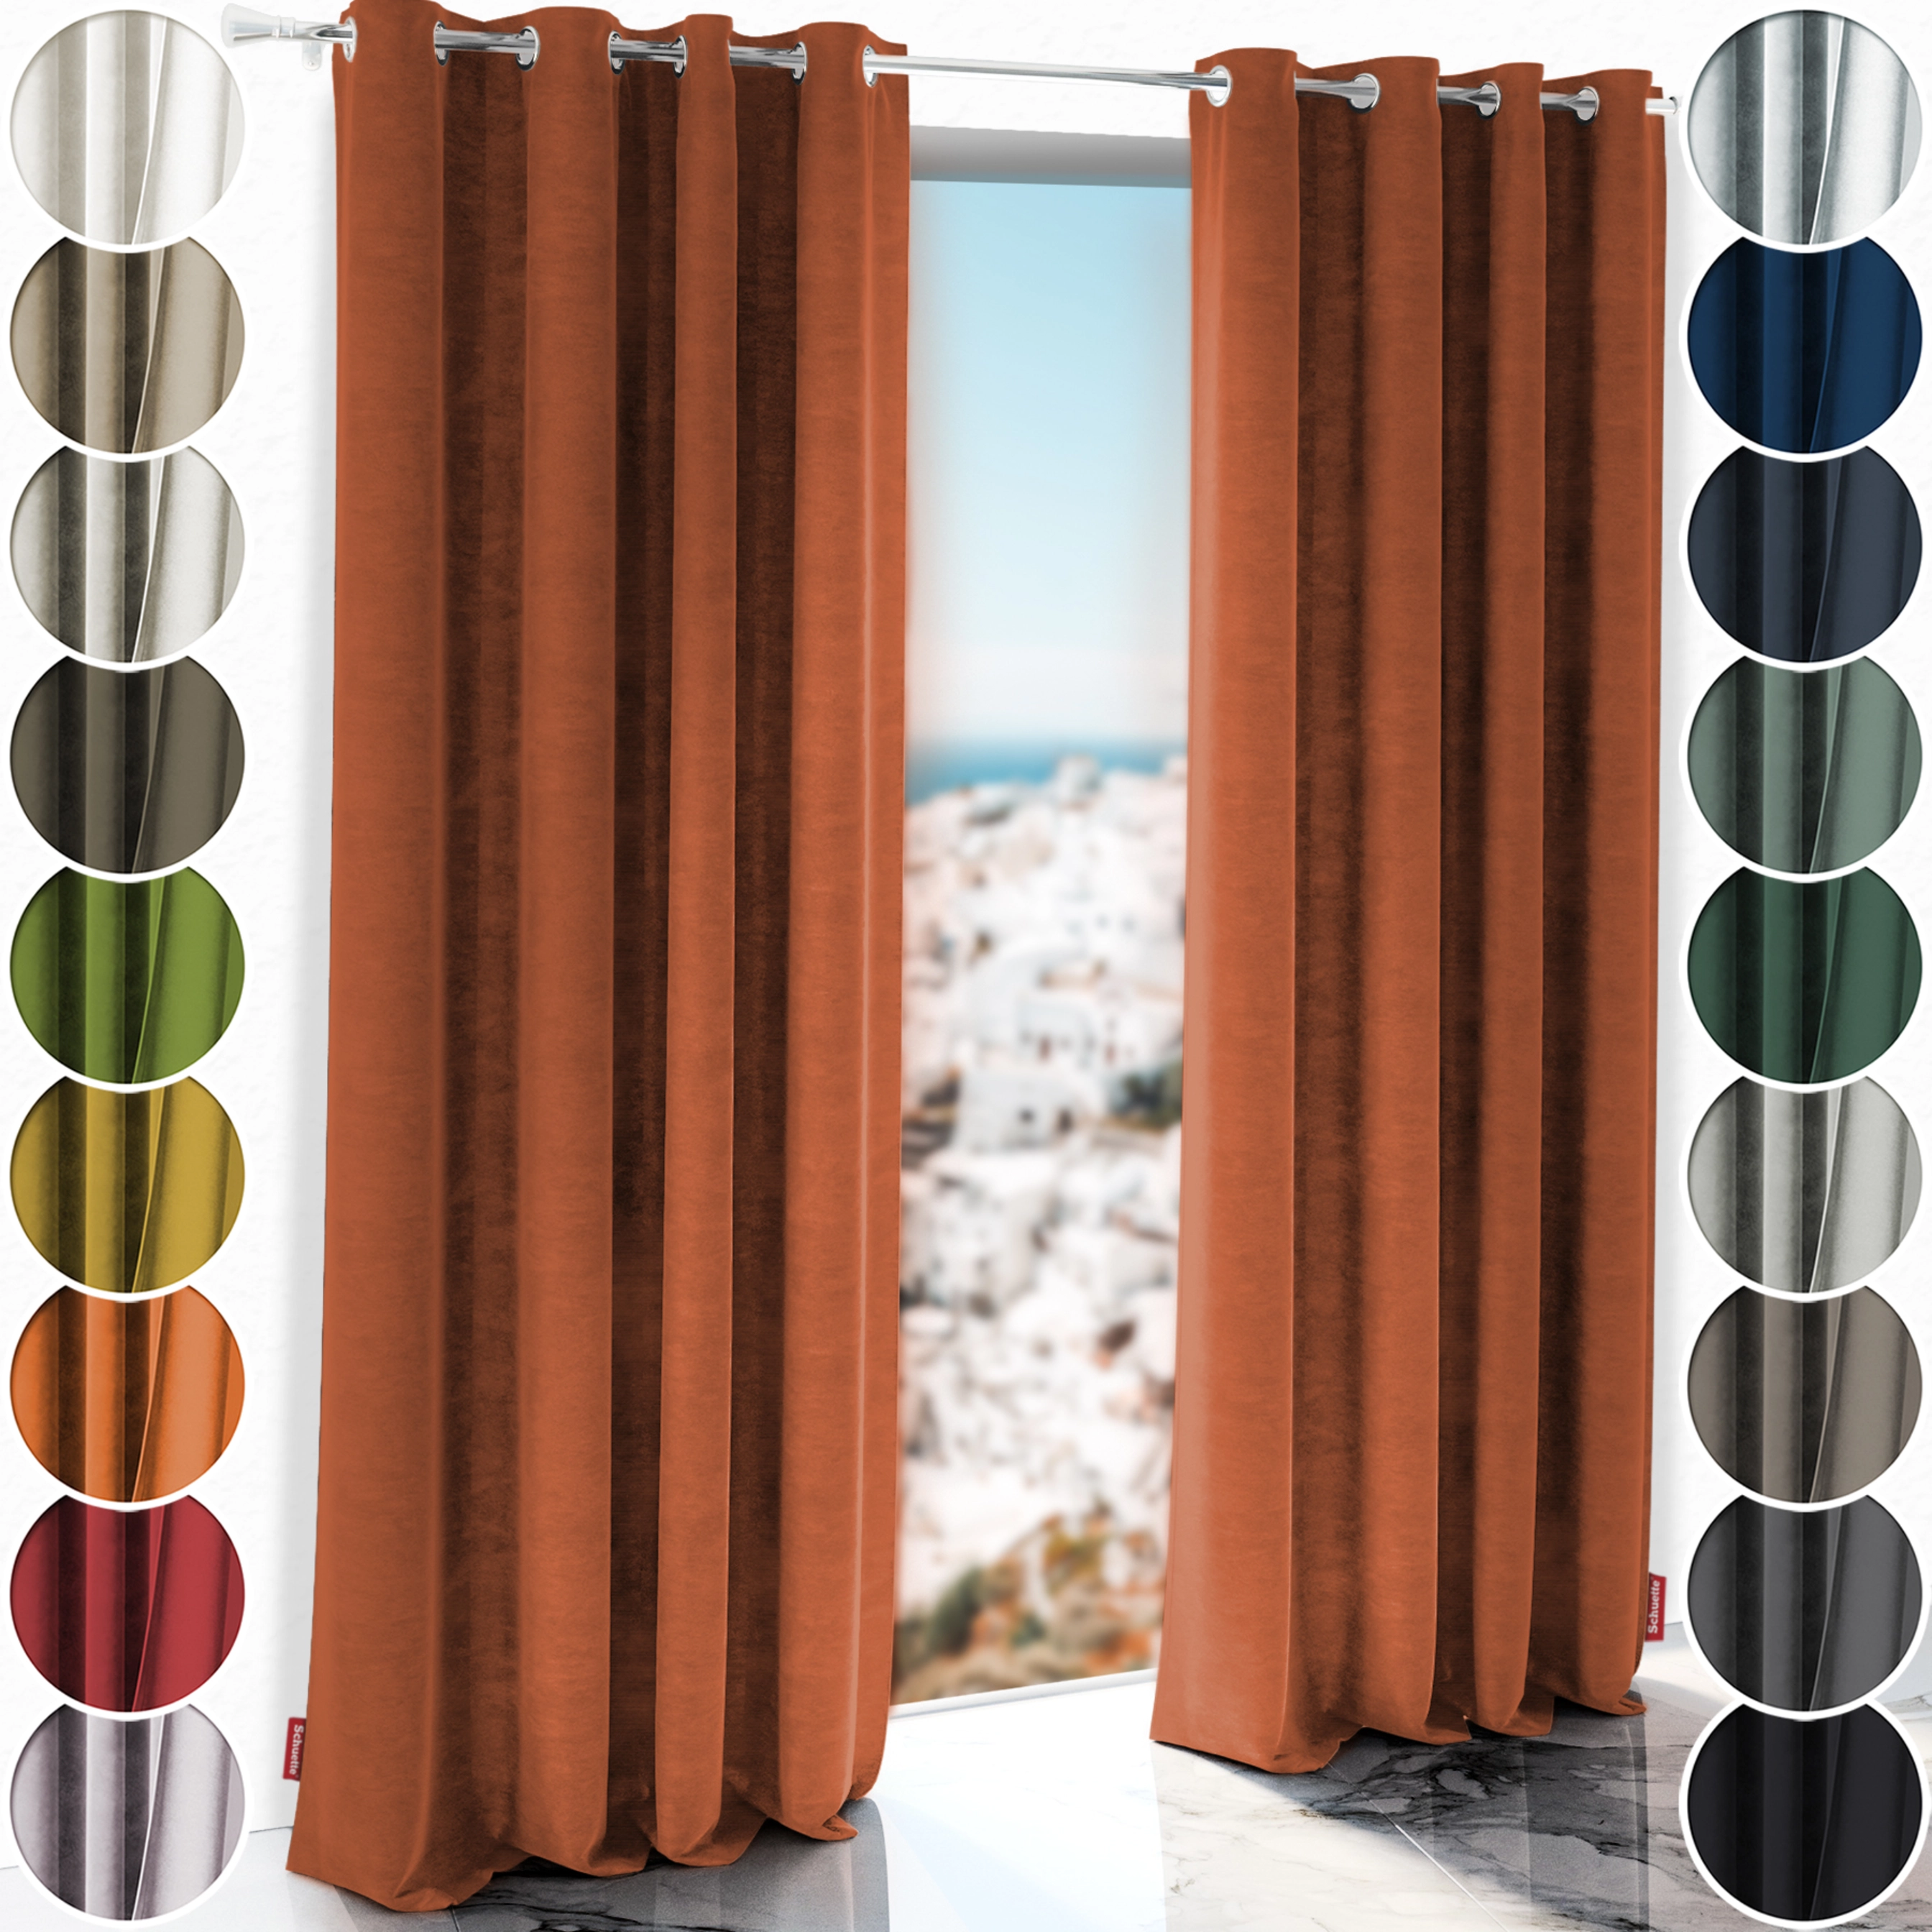 Schuette® Blackout Curtain with Eyelets ● Millenium Velvet Collection: Marmalade (Orange) ● 1 piece ● Crease-resistant Easy-care Thermo Opaque & heavily darkening